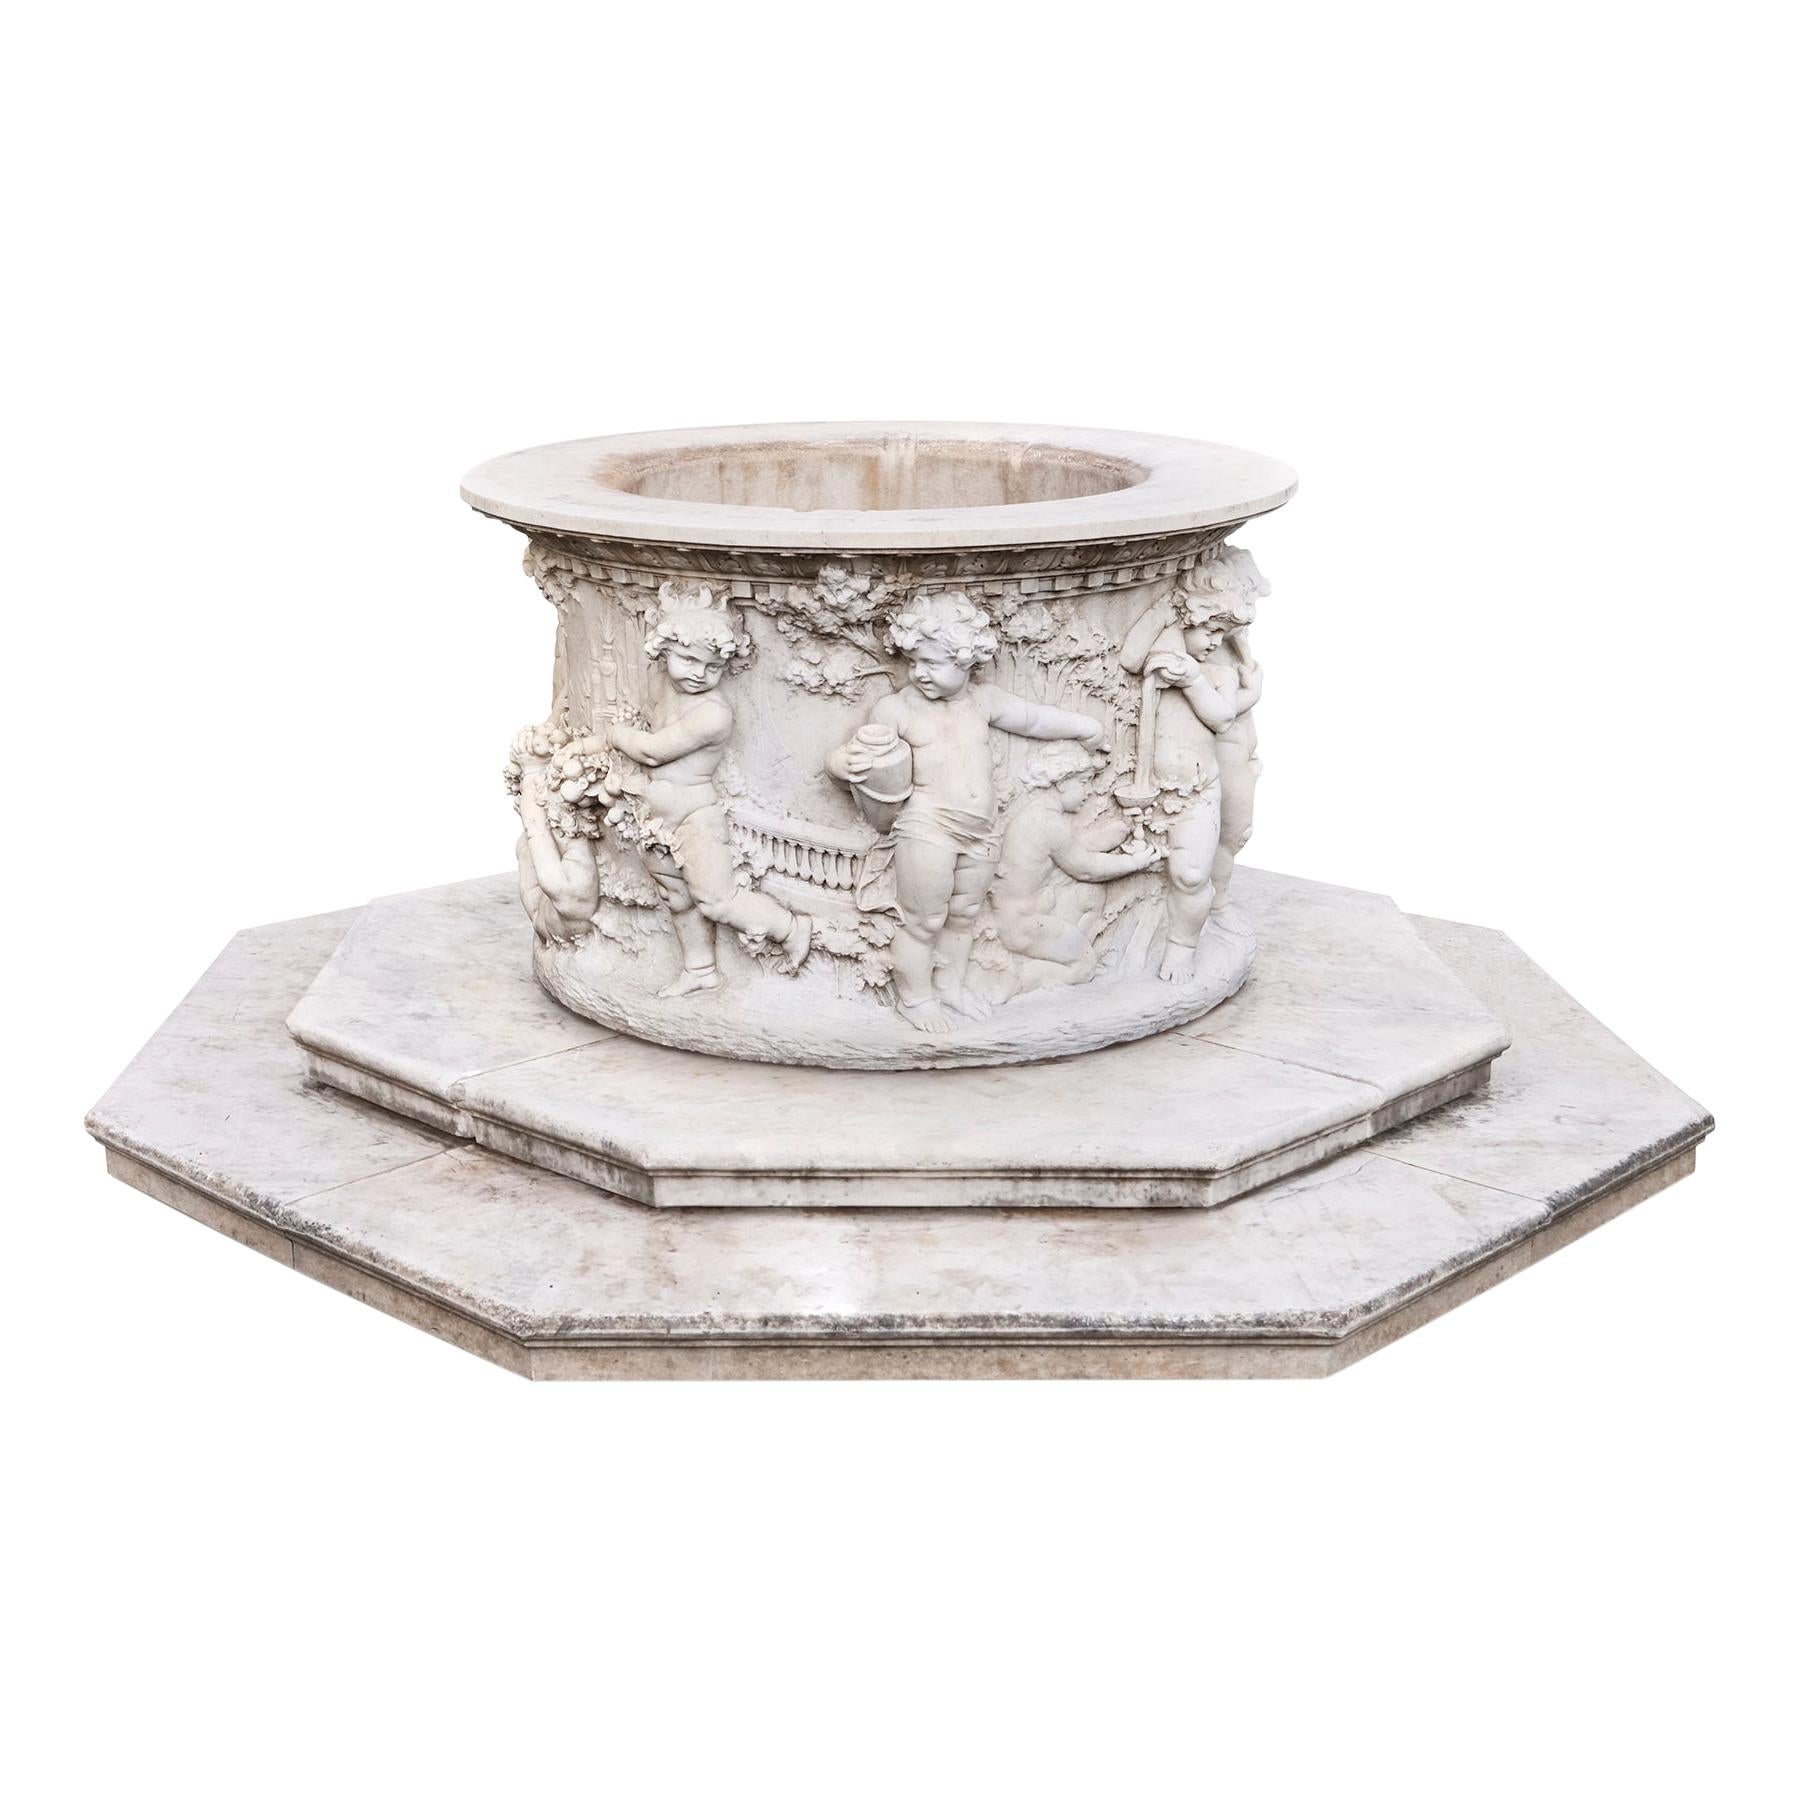 Carrara Marble Wellhead with Intricate Carvings Raised on Octagonal Base, 1920s